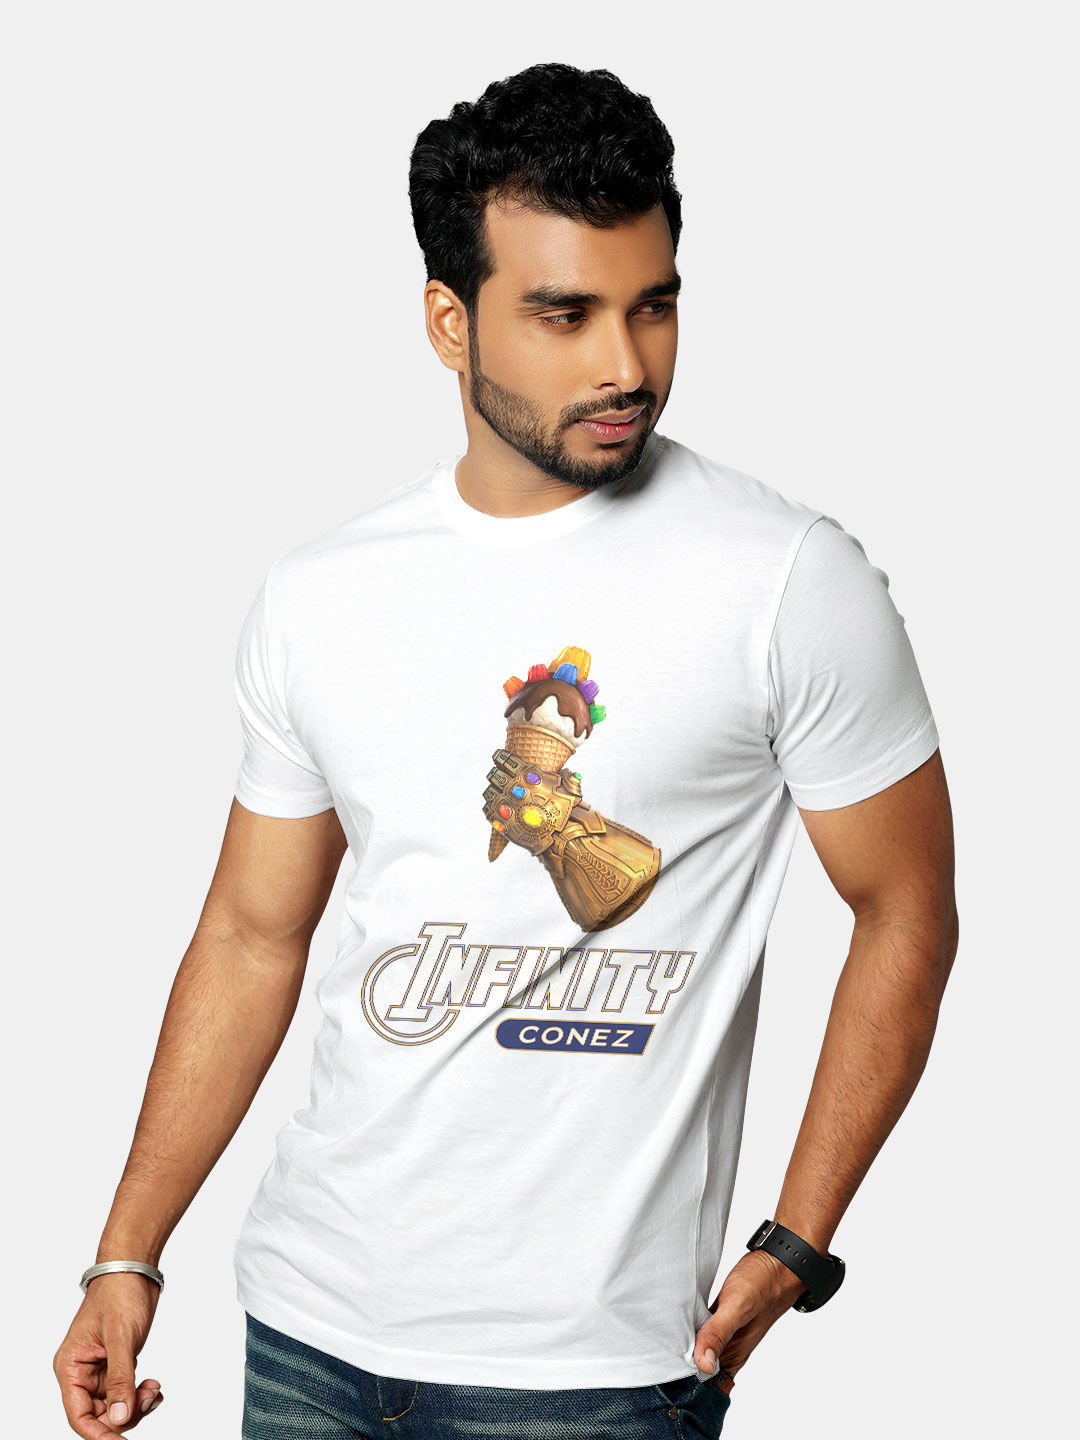 Buy Infinity Conez - Male Designer T-Shirts T-Shirts Online